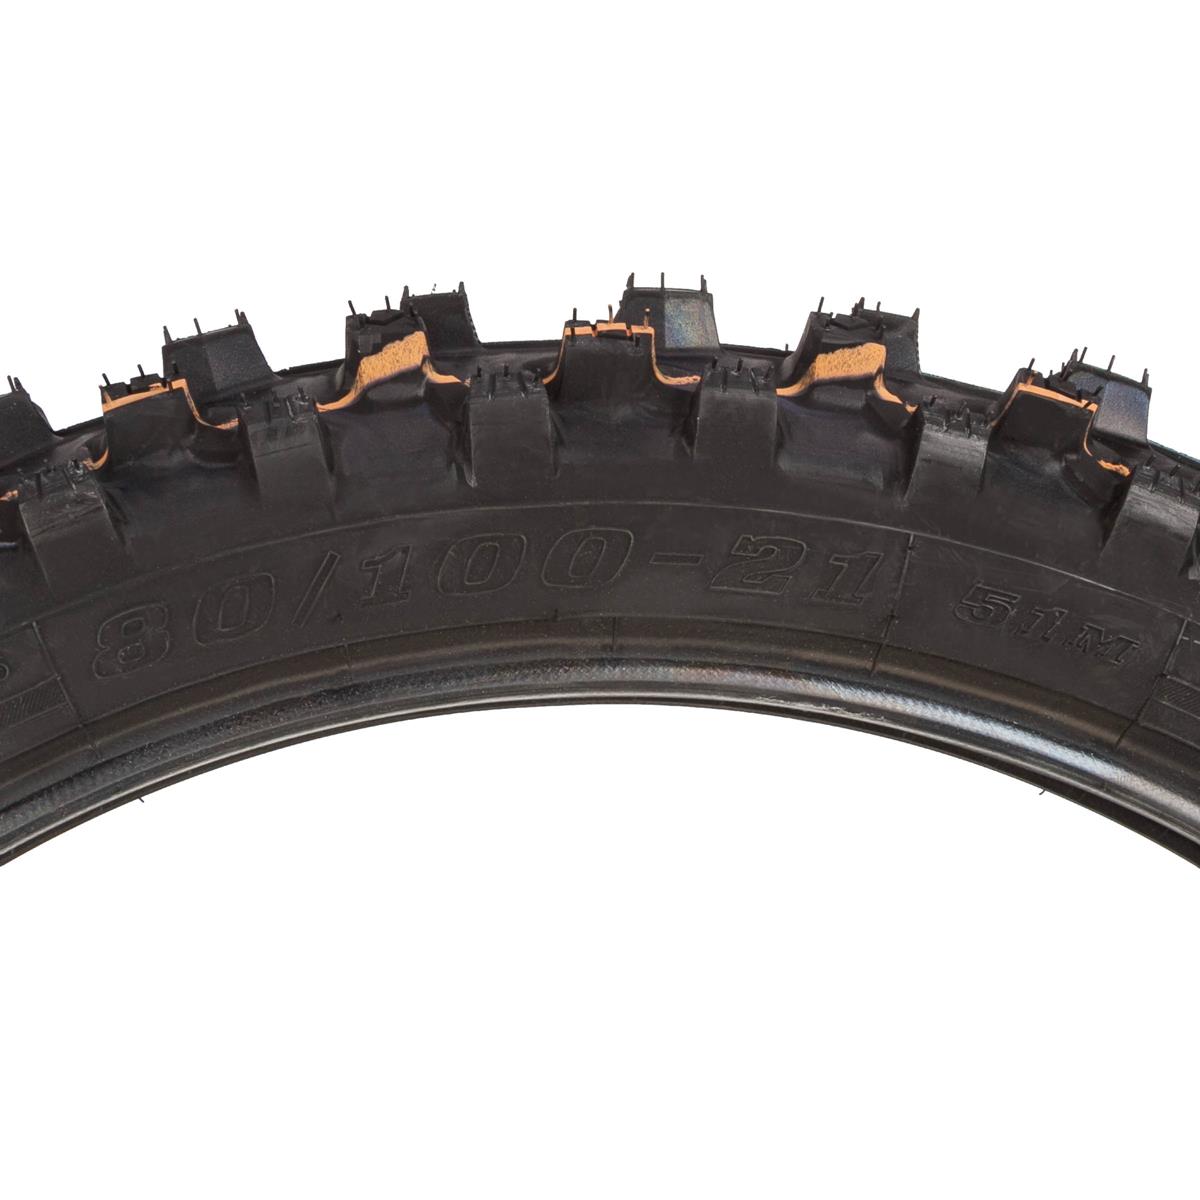 Dunlop Geomax MX33 80/100-21 Front Tire 45234071